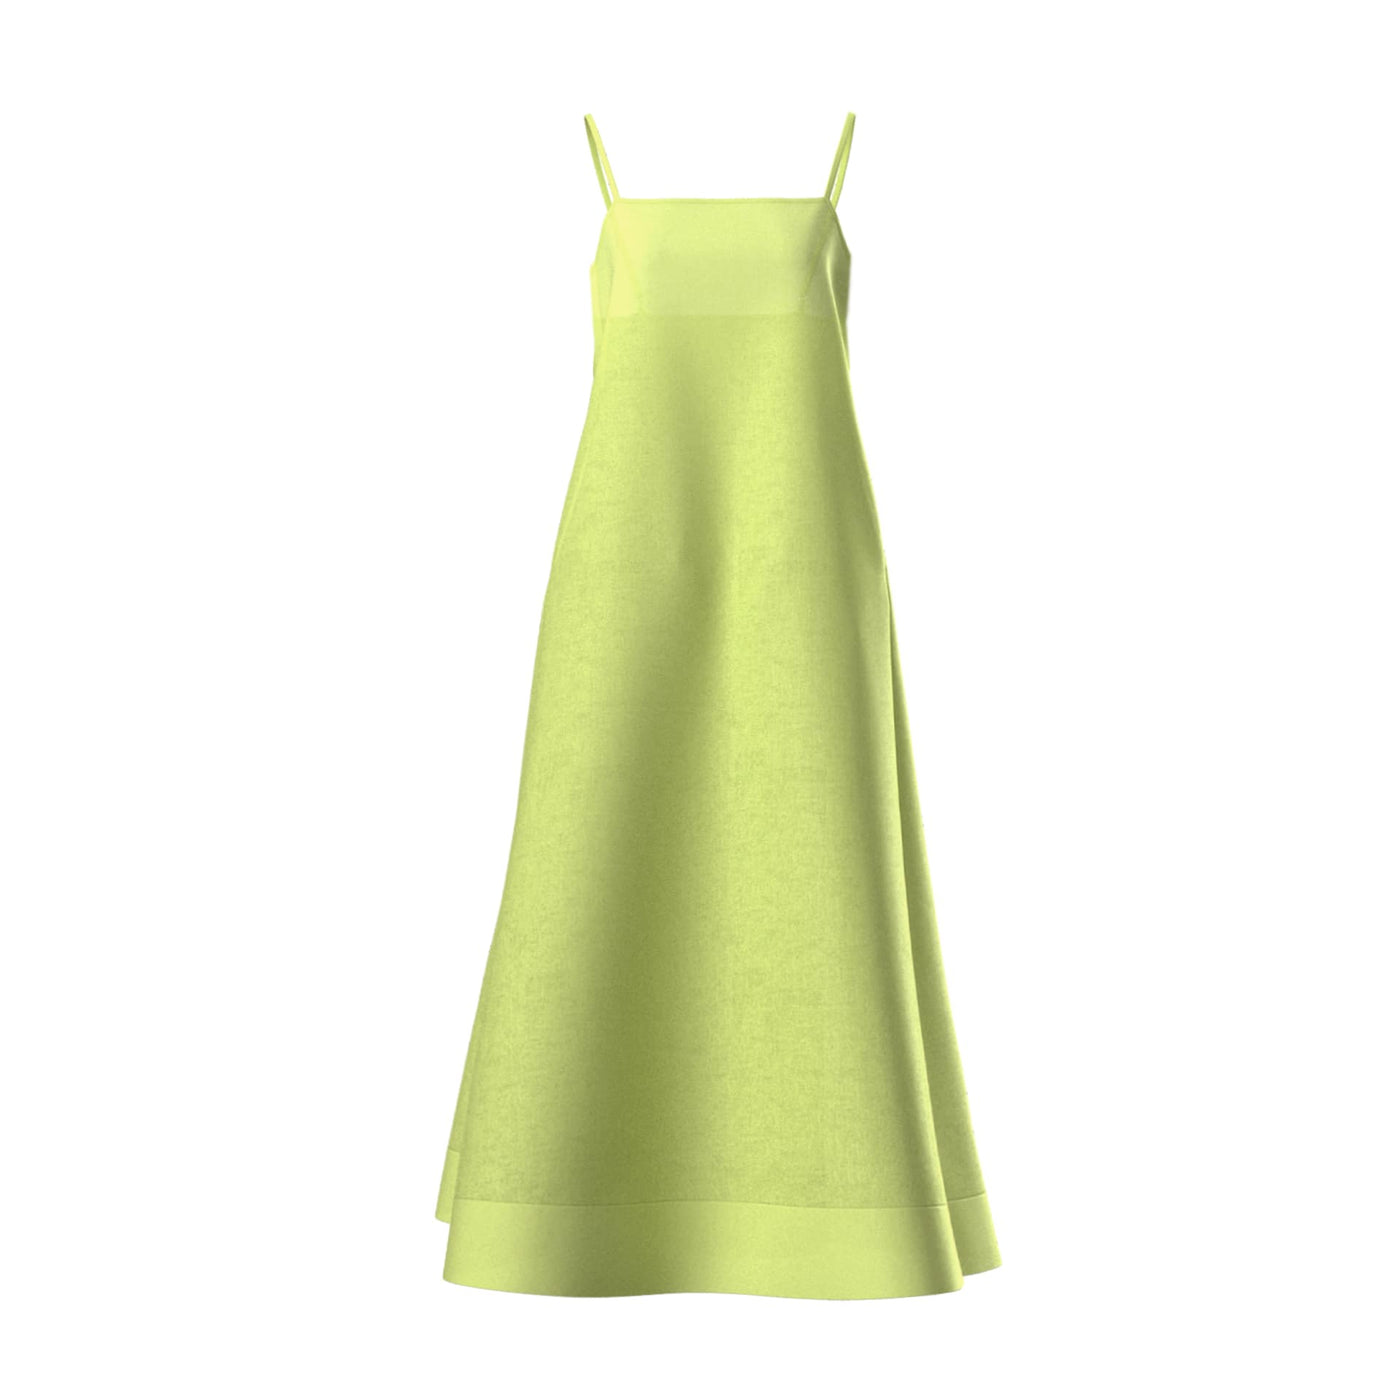 Lilly Pilly Collection 100% organic linen Coco dress in Lemongrass as 3D model showing front view